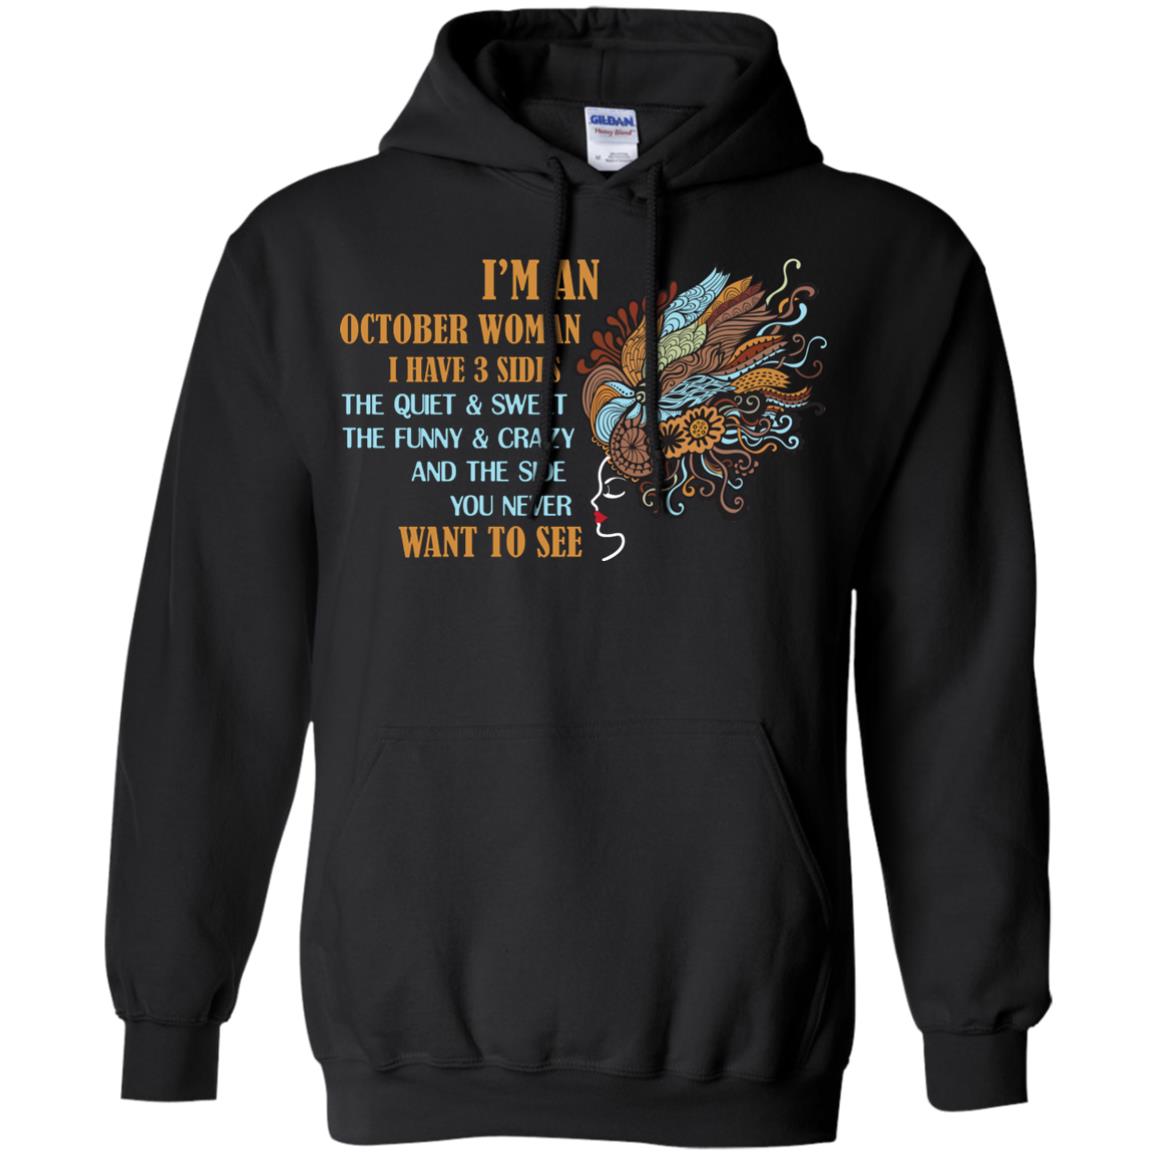 I'm An October Woman I Have 3 Sides The Quite And Sweet The Funny And Crazy And The Side You Never Want To SeeG185 Gildan Pullover Hoodie 8 oz.